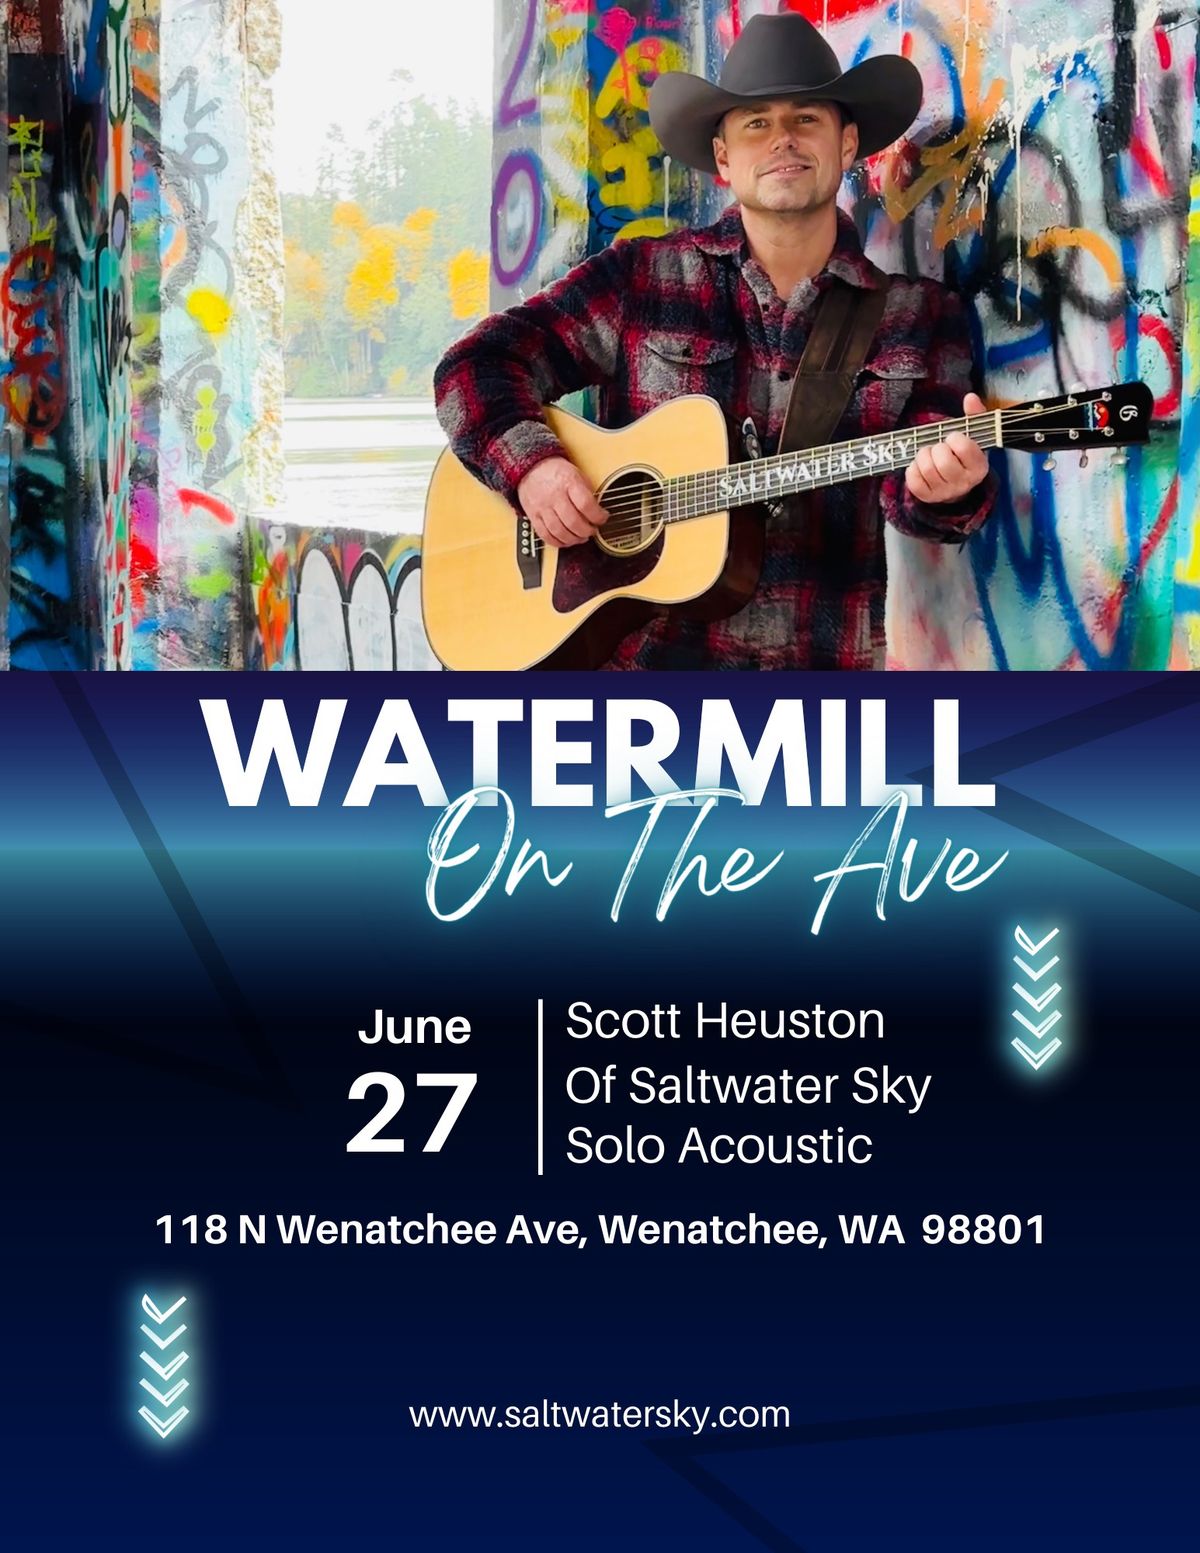 Scott Heuston of Saltwater Sky Solo Acoustic at Watermill on the Ave